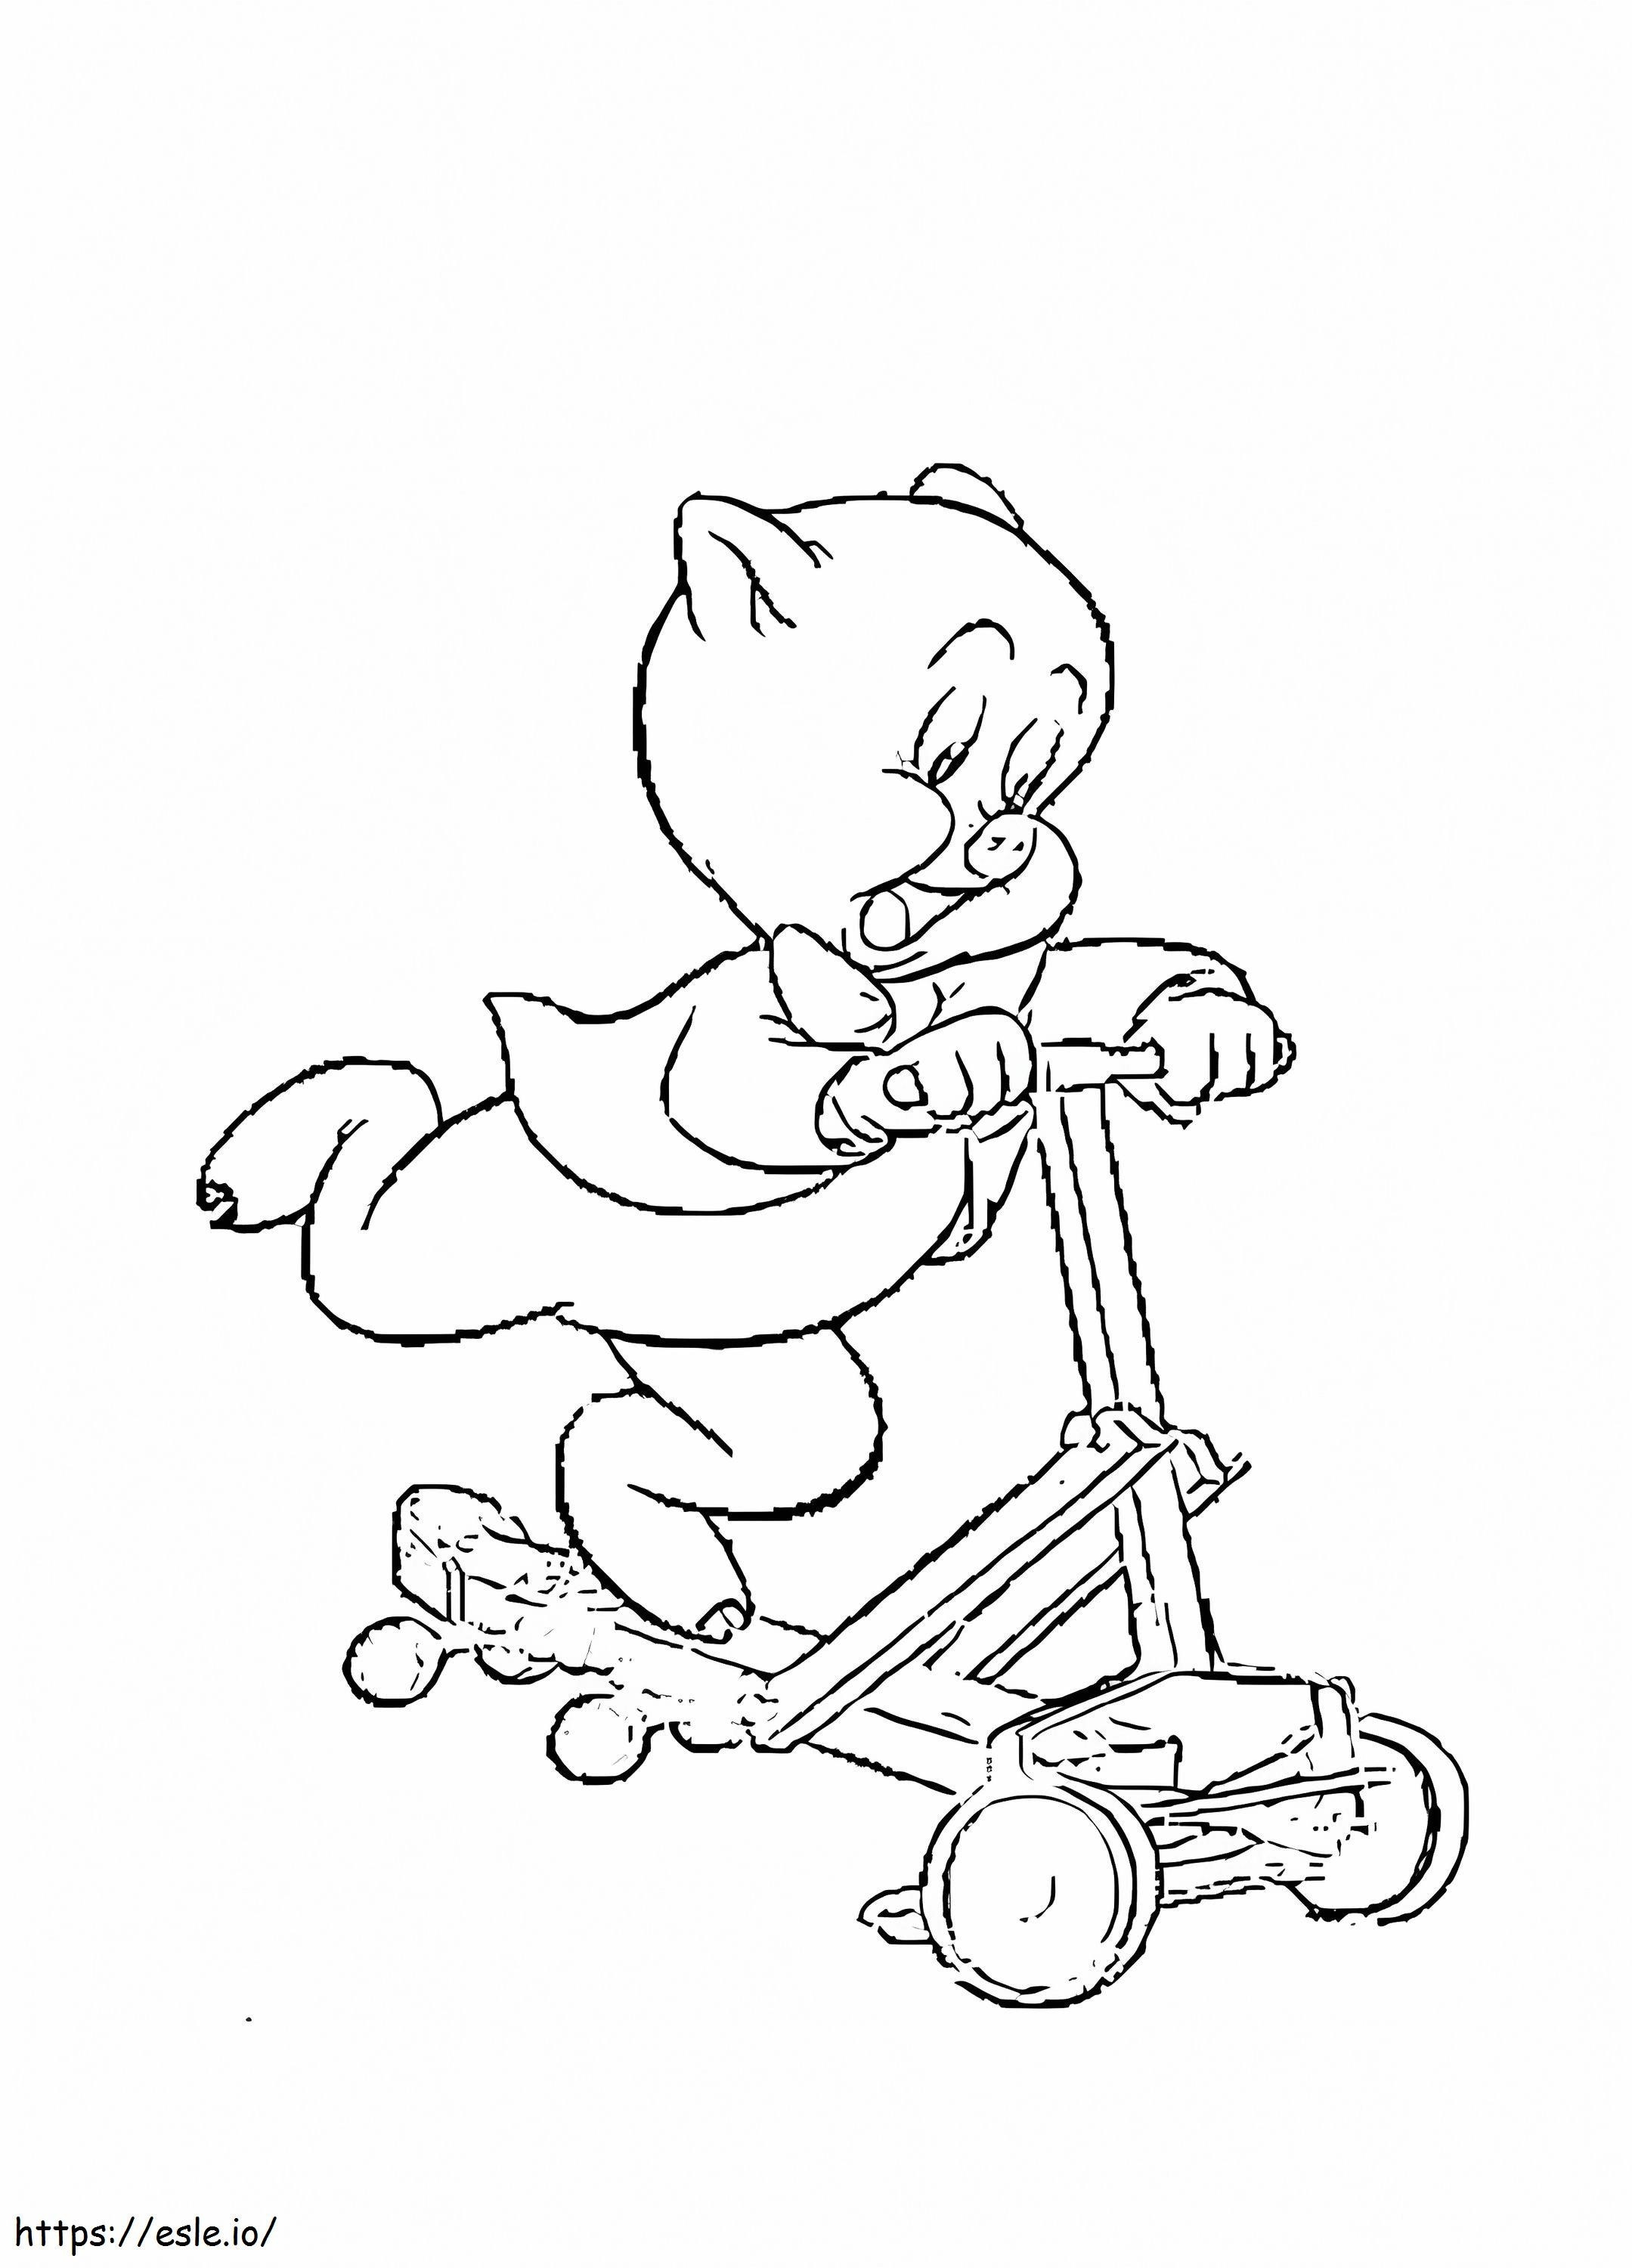 Free Porky Pig coloring page